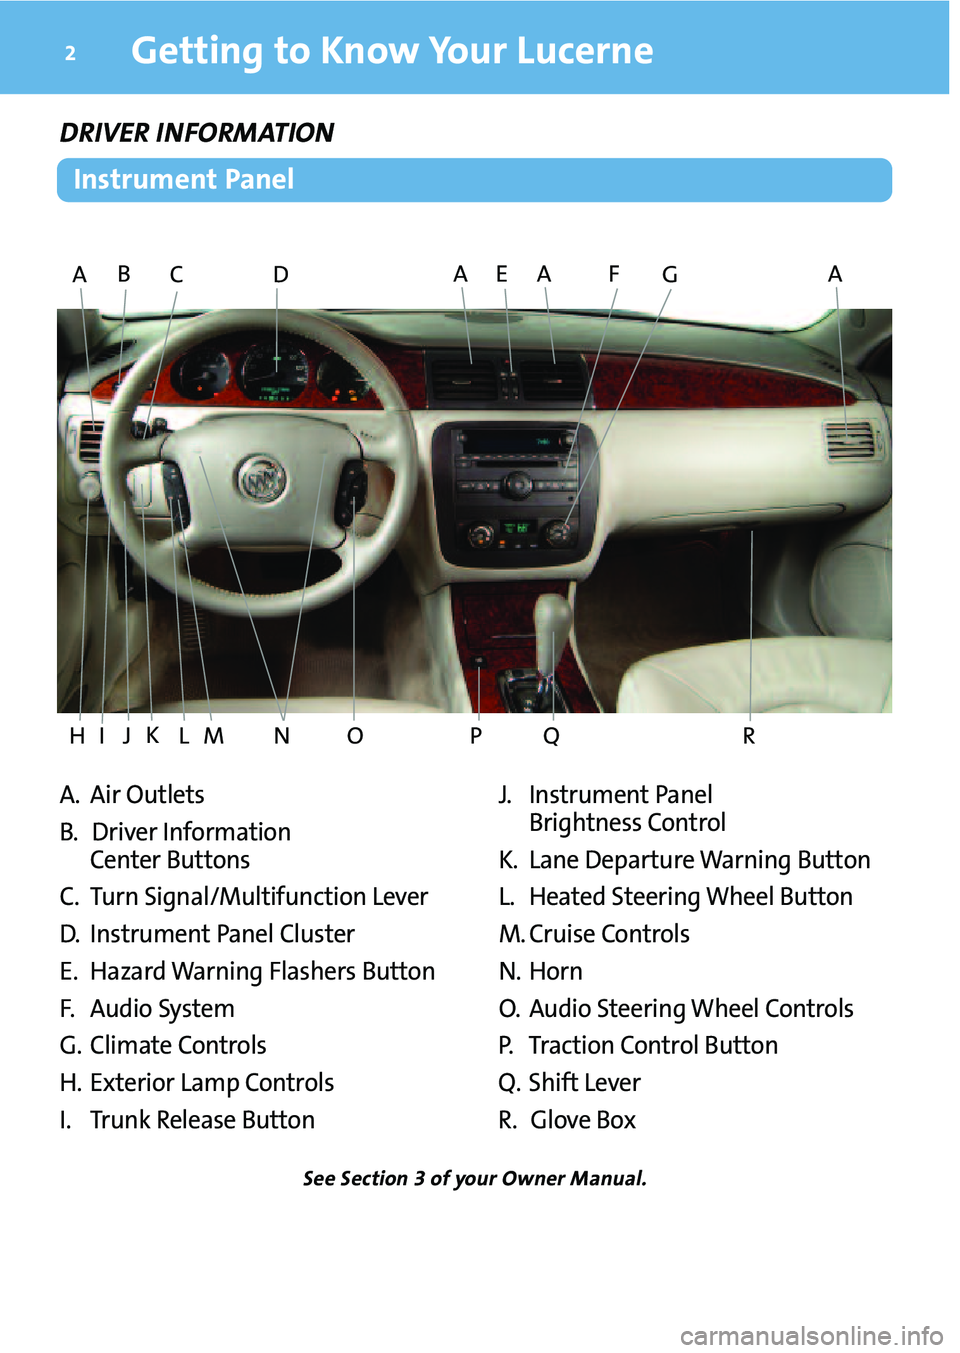 BUICK LUCERNE 2009  Get To Know Guide Getting to Know YourLucerne2
A.Air Outlet s
B.Driver Info rmation
Center Button s
C.Tur nSign al/Multifunct ionLever
D.Instrumen tPanel Cluster
E. Haza rdWarnin gFlashers Button
F.Audio System
G.Clim 